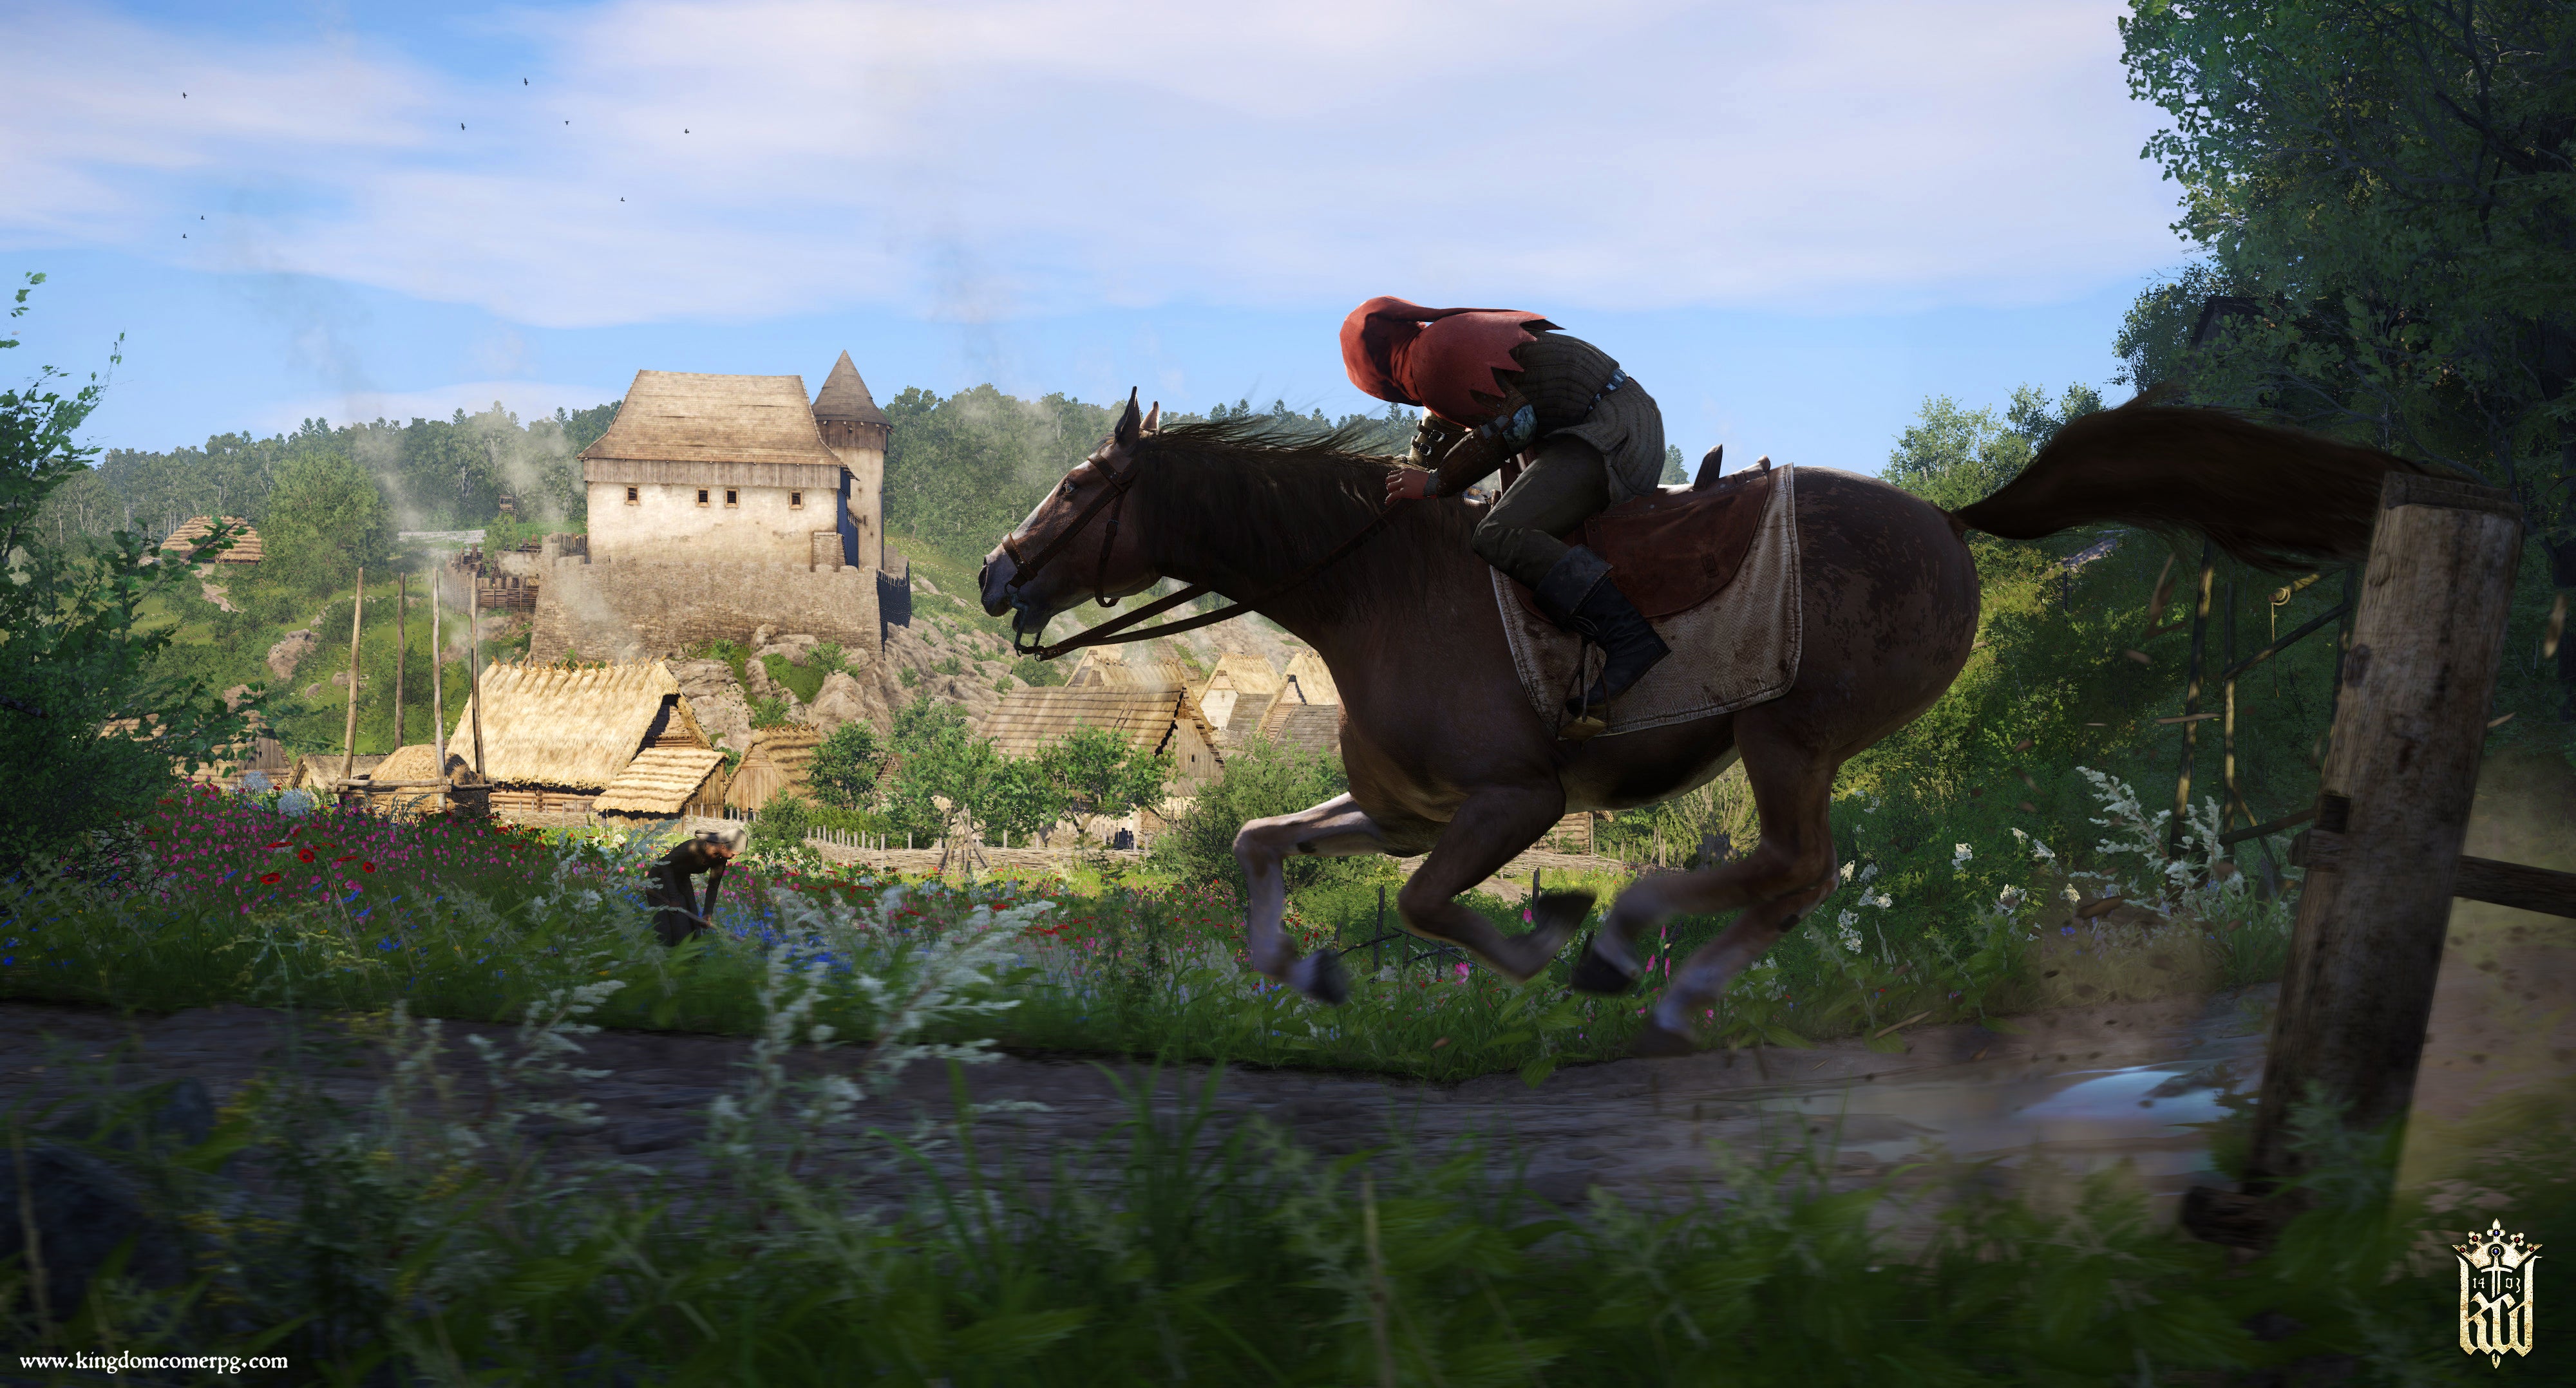 George Hanbury Intensiv spørgeskema Kingdom Come Deliverance suffers from poor performance across all consoles,  even if Xbox One X has resolution advantage - report | VG247